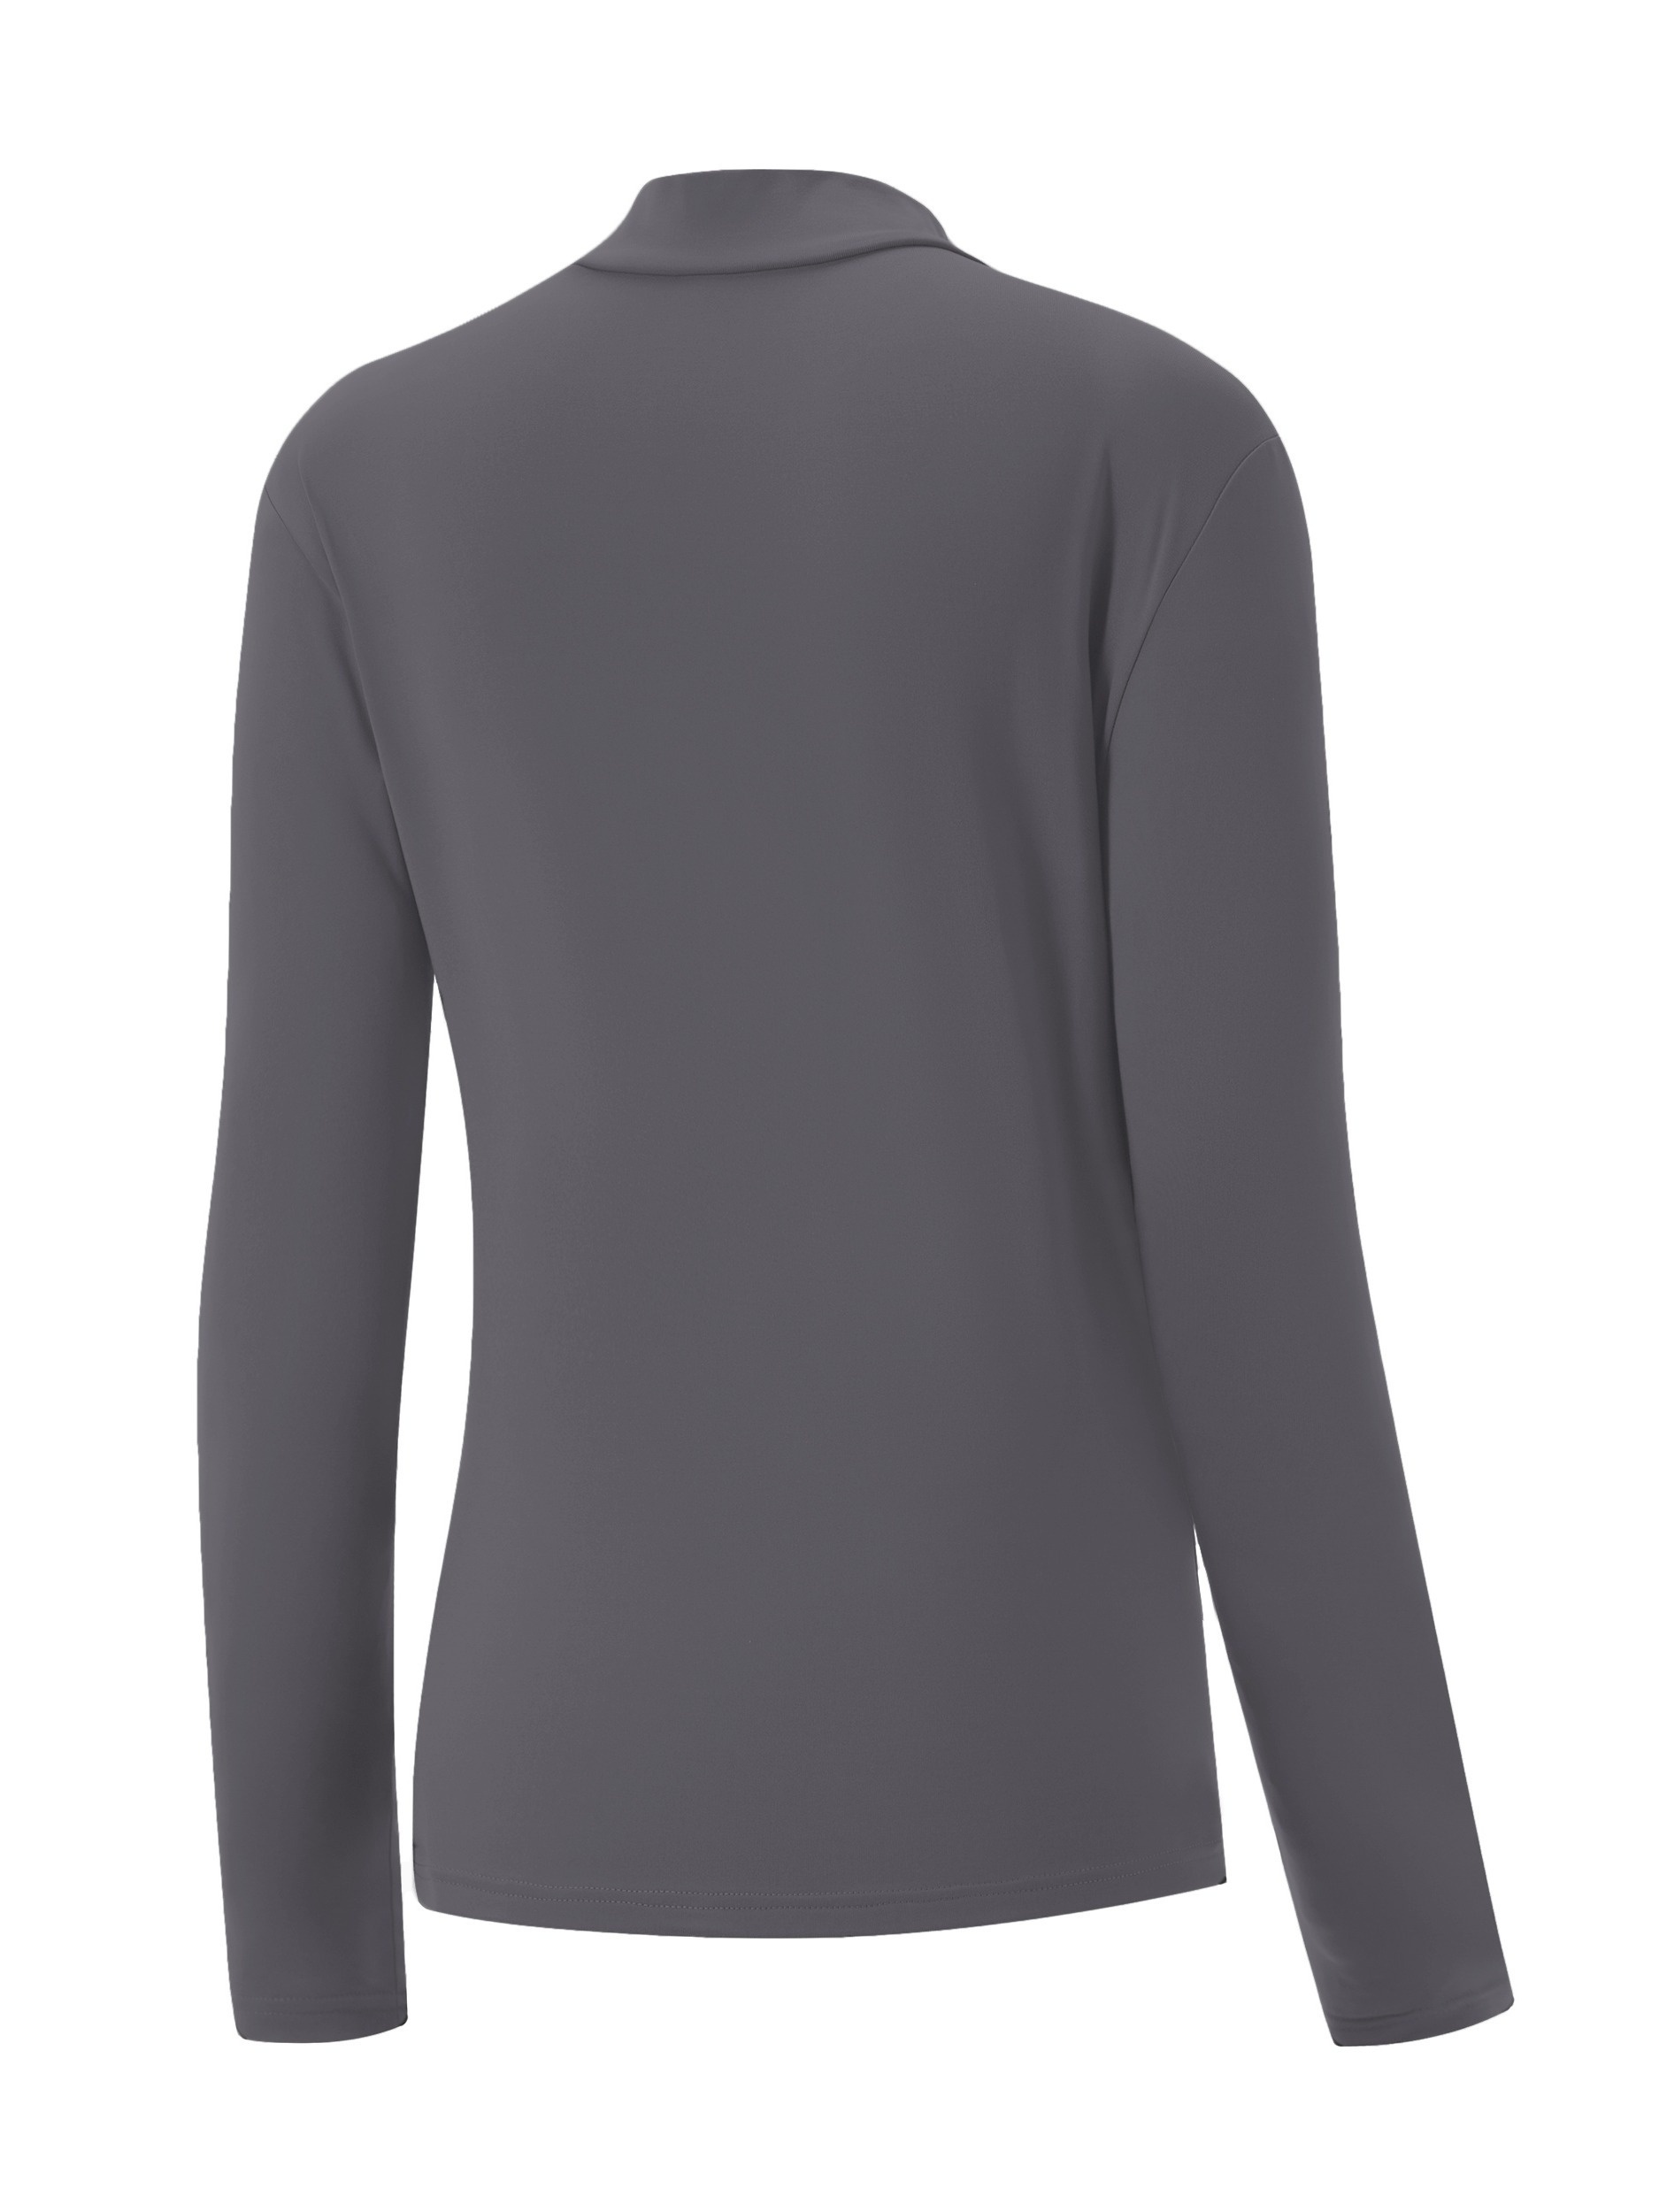 Womens Baselayers, All Womens Clothing, Womens Clothing